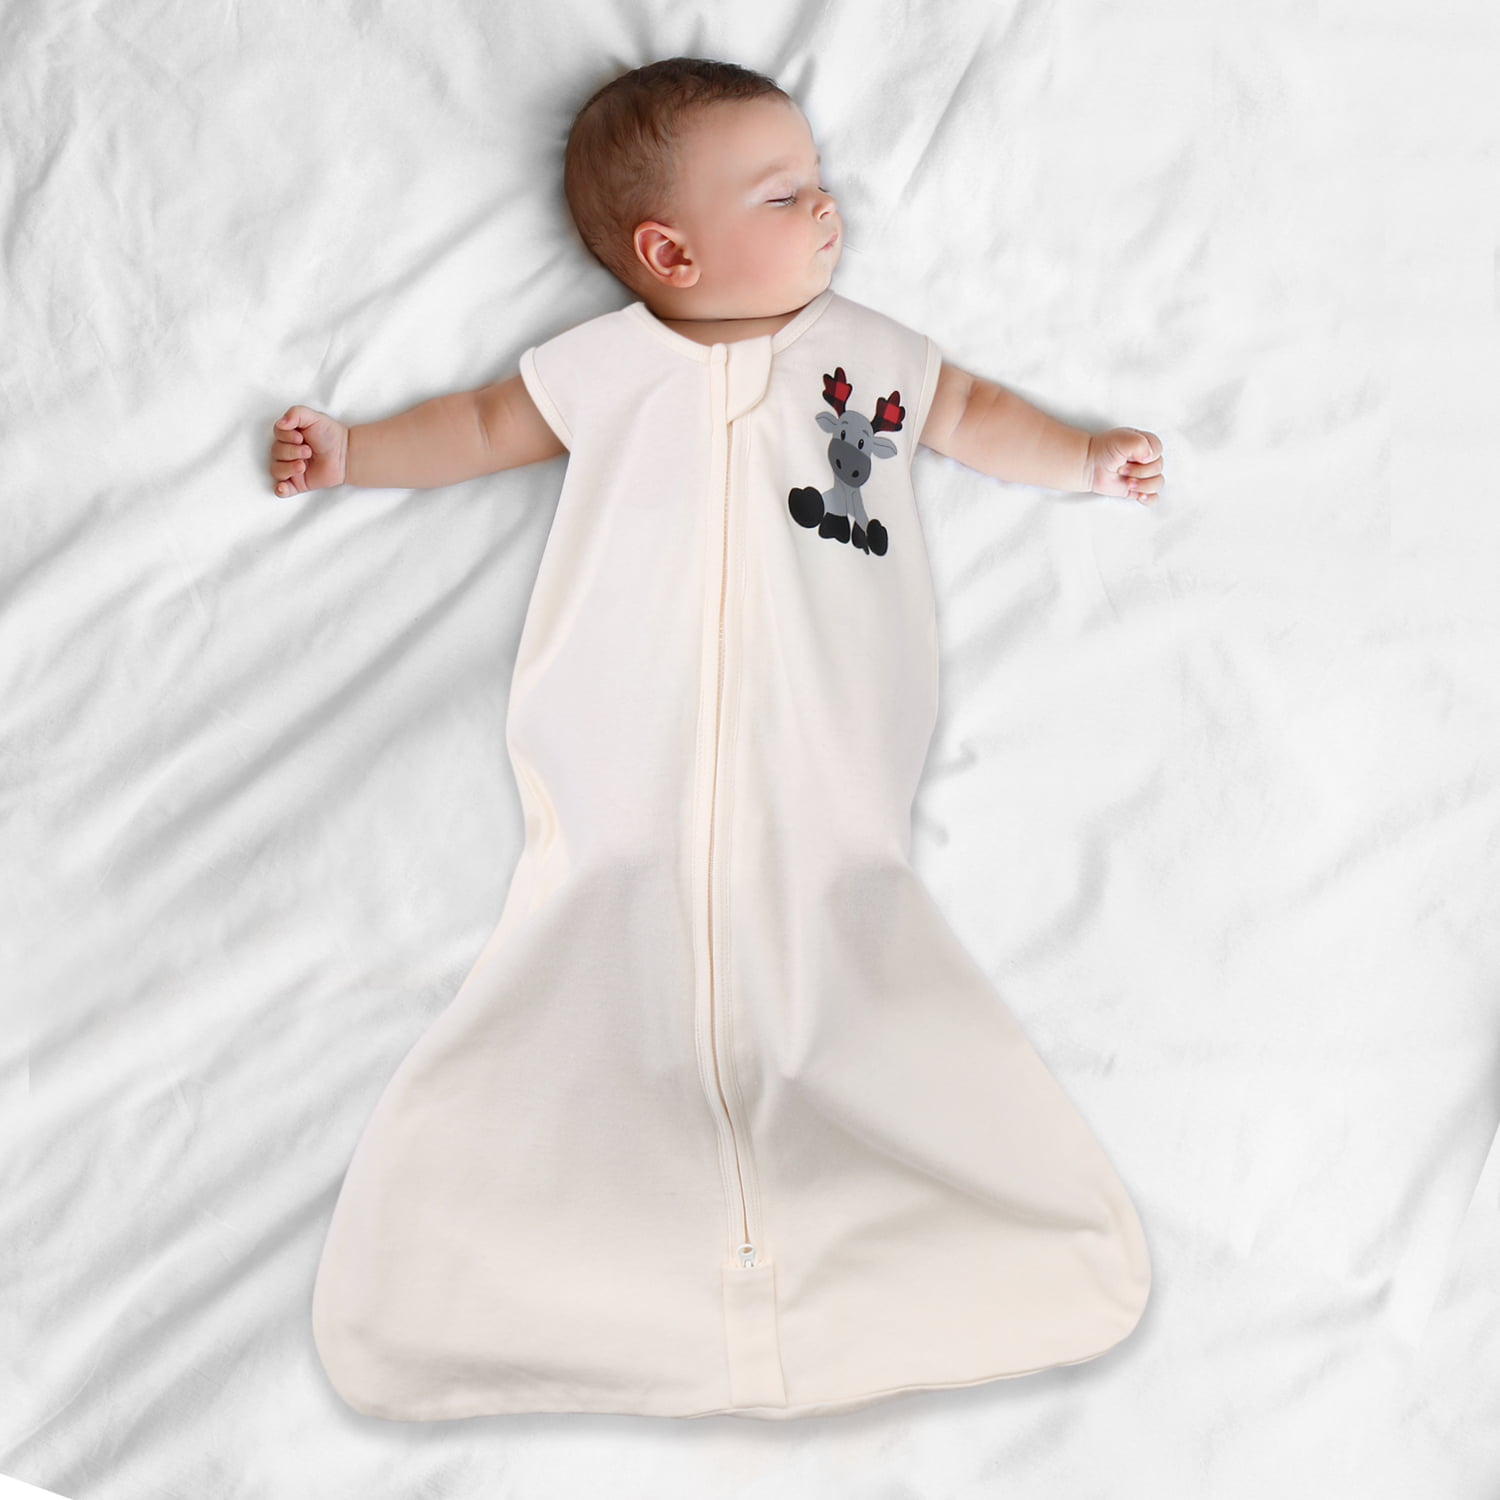 keeps baby warm and safe all night long. with hand covers or knit cuffs Up to 36 custom MINKY sleep sack snuggly Safe